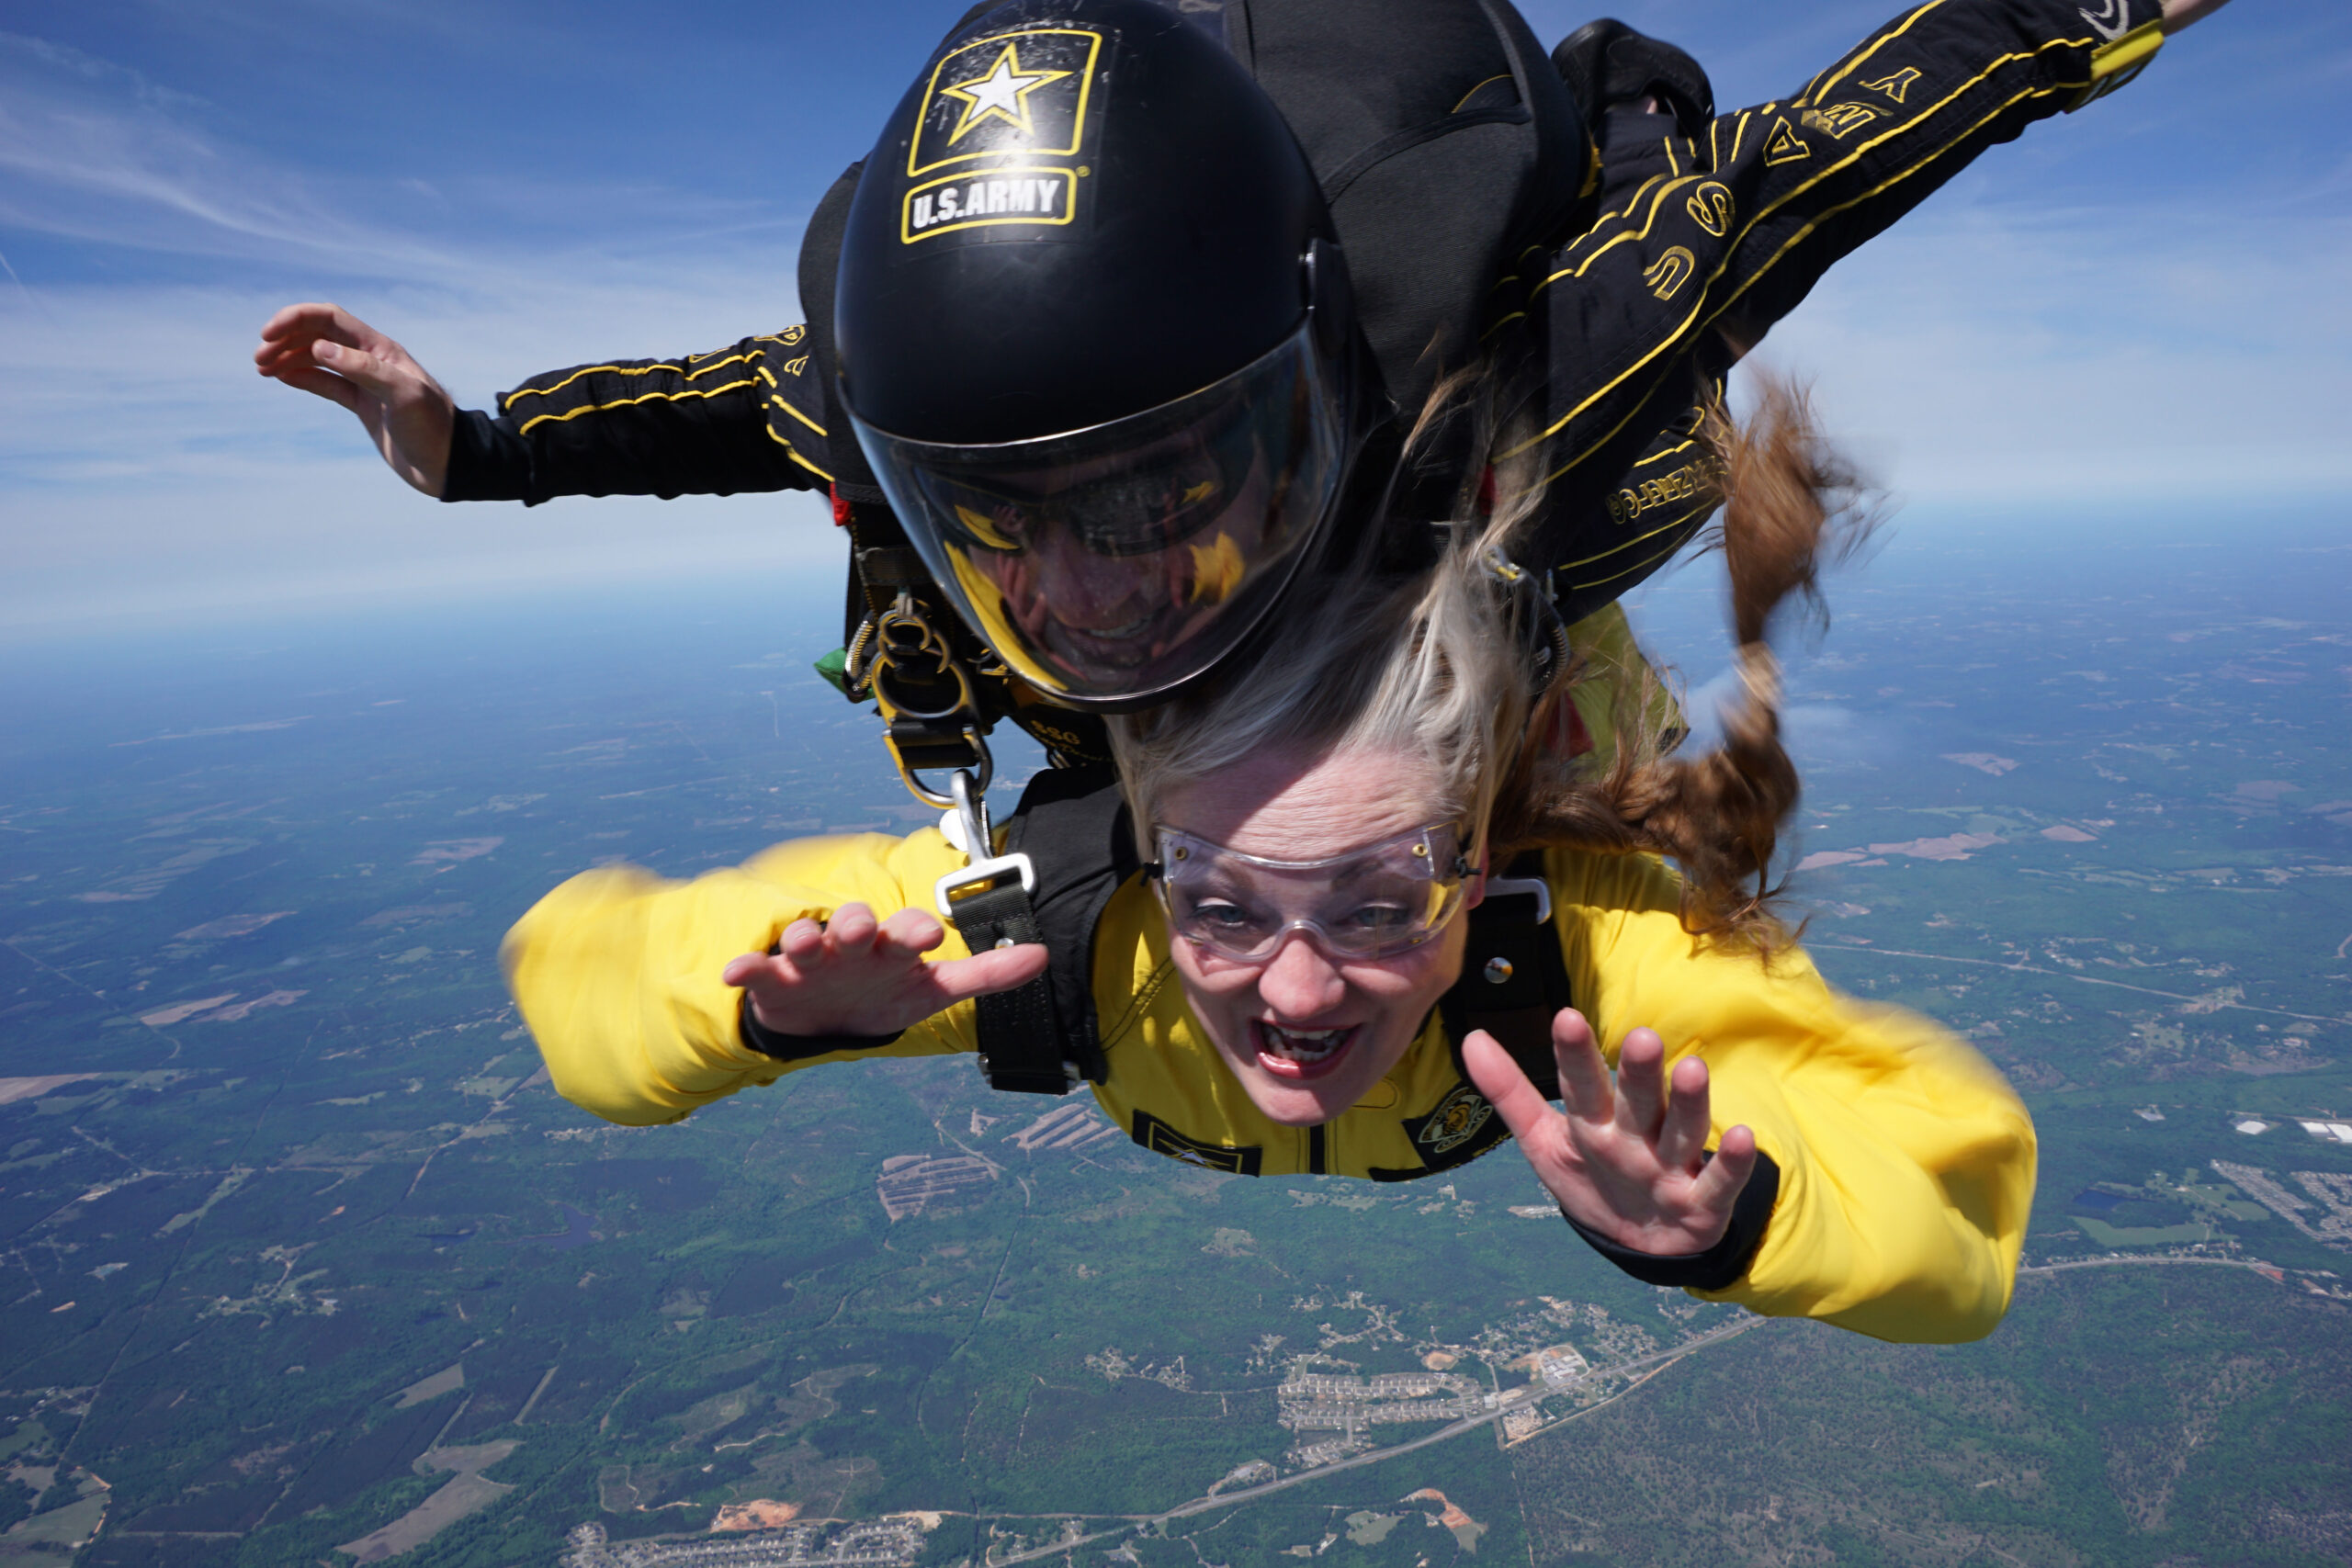 Mo in a tandem skydive with the Army Golden Knights